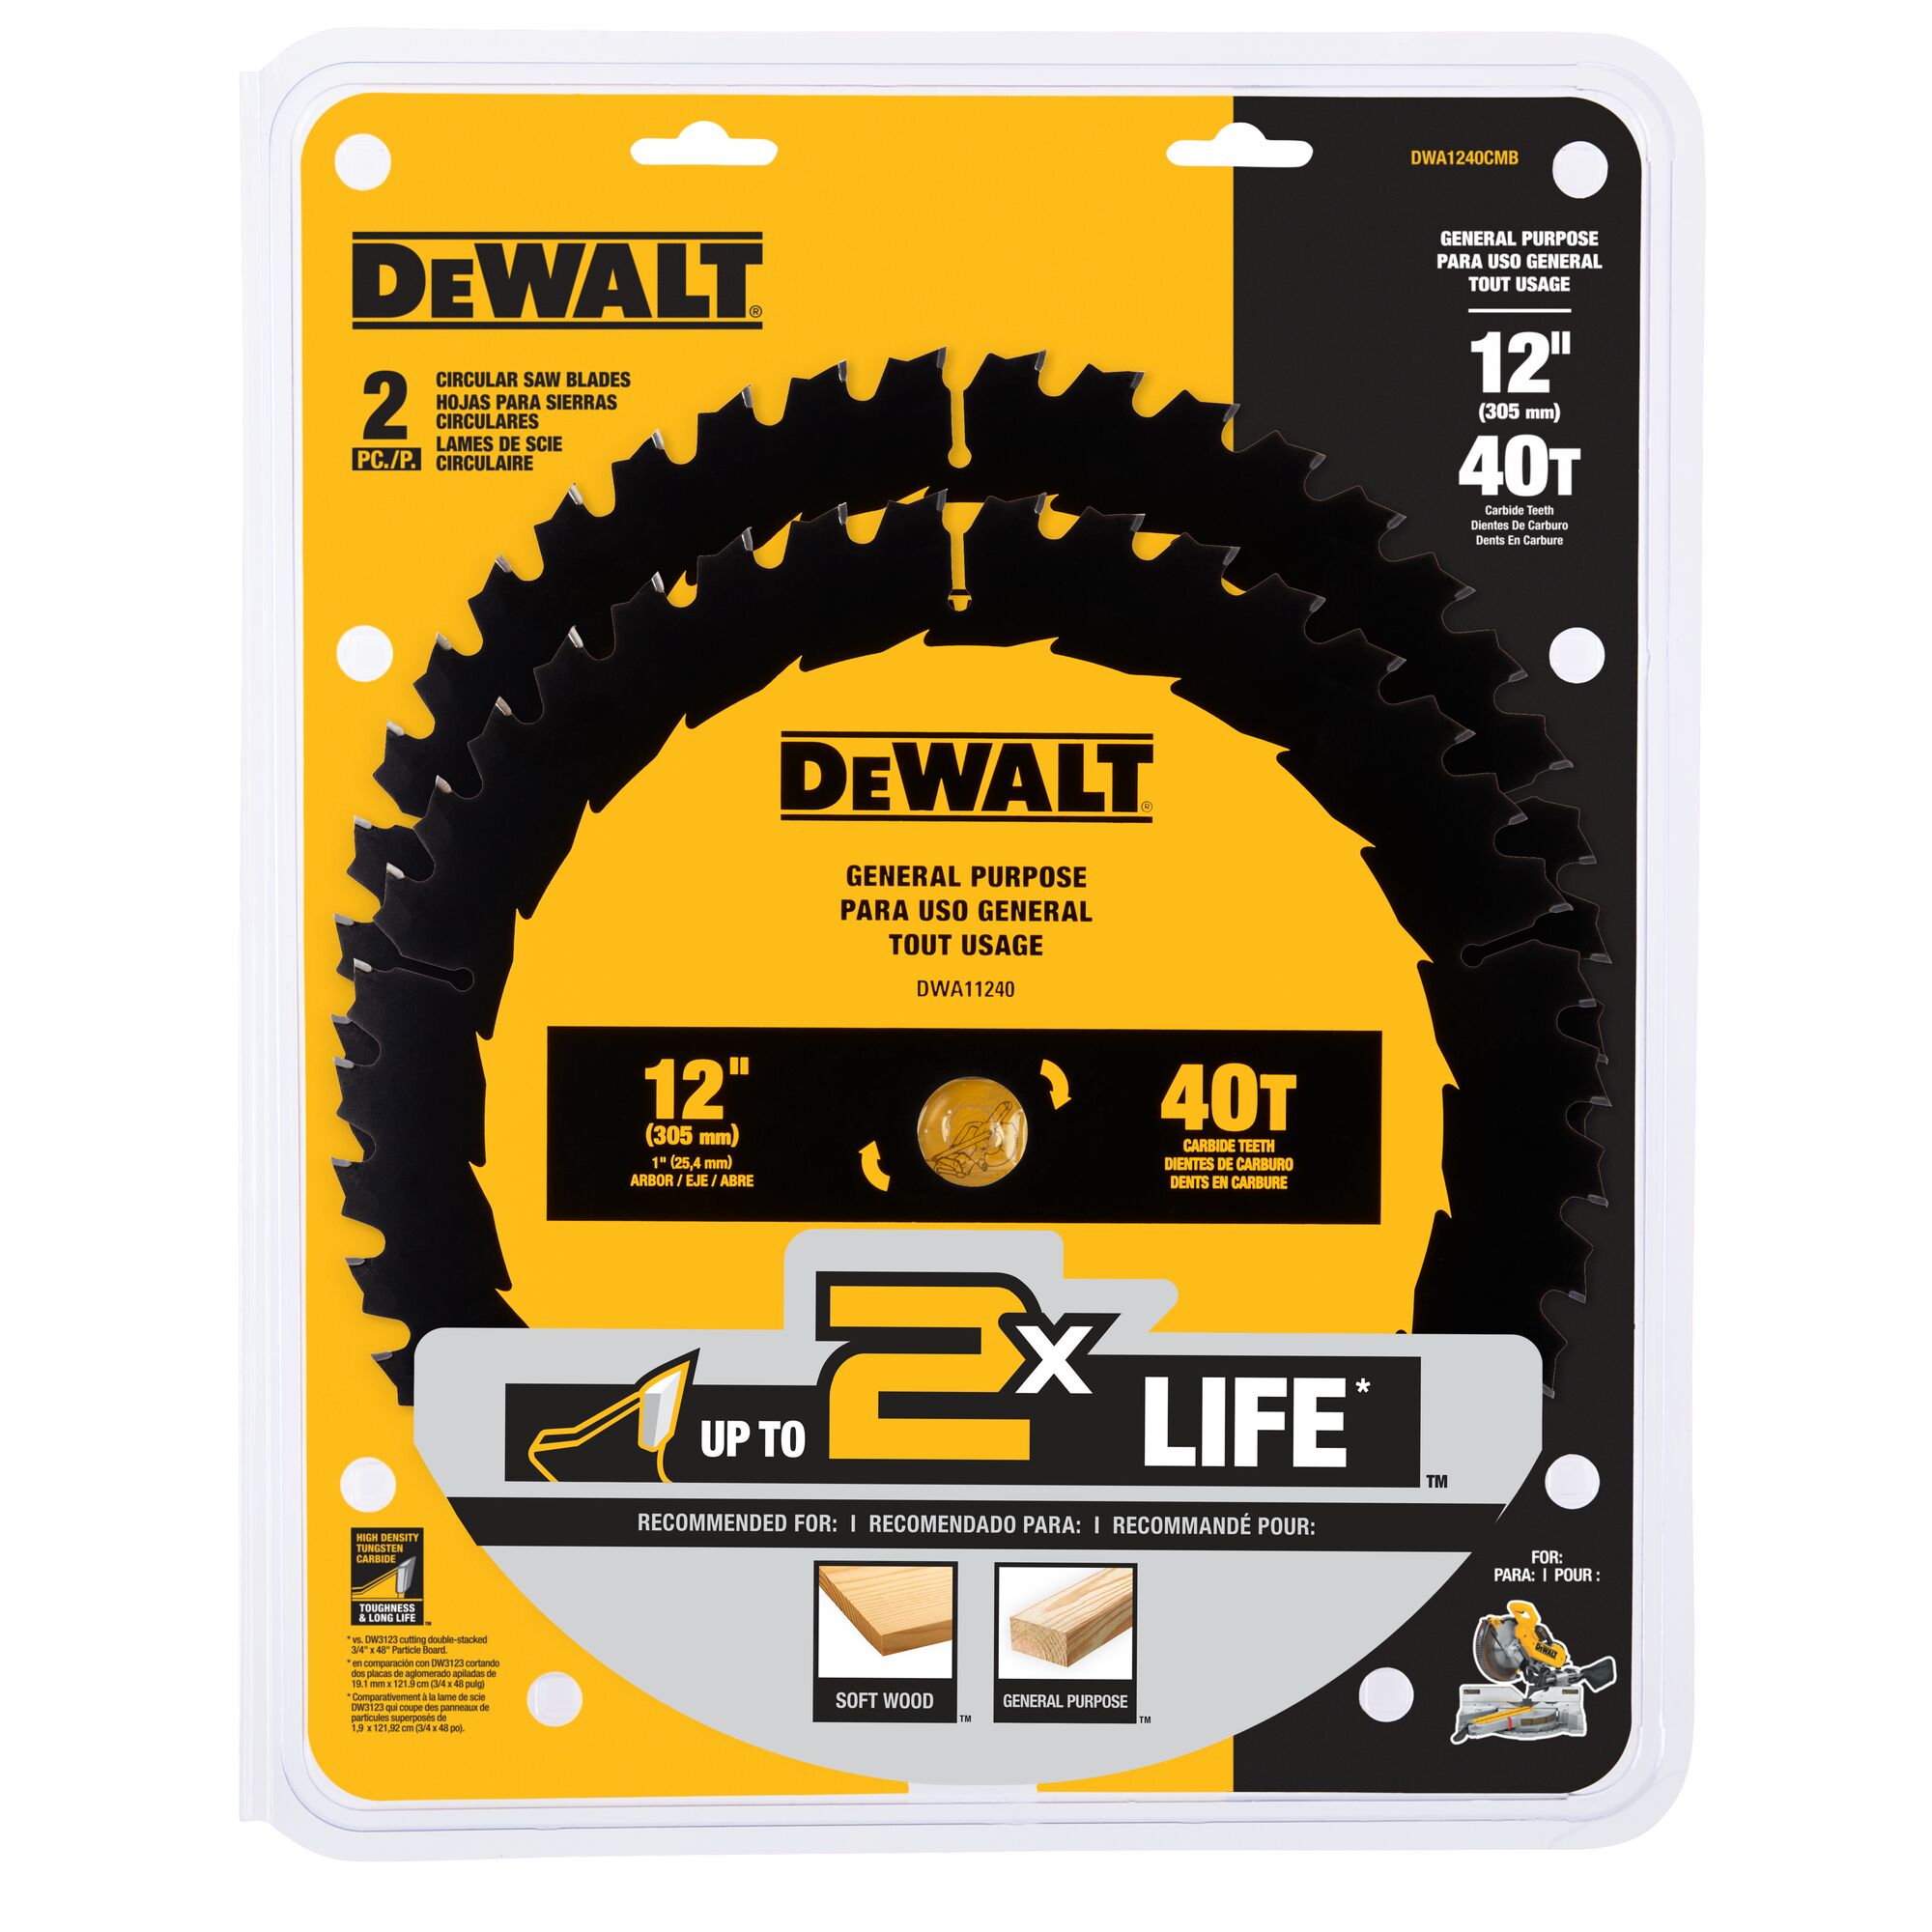 Lowe's DEWALT Circular Saw Blades (2 pack) 12-in 40-Tooth Tungsten Carbide-tipped Steel Blades for Miter Saw $34.97